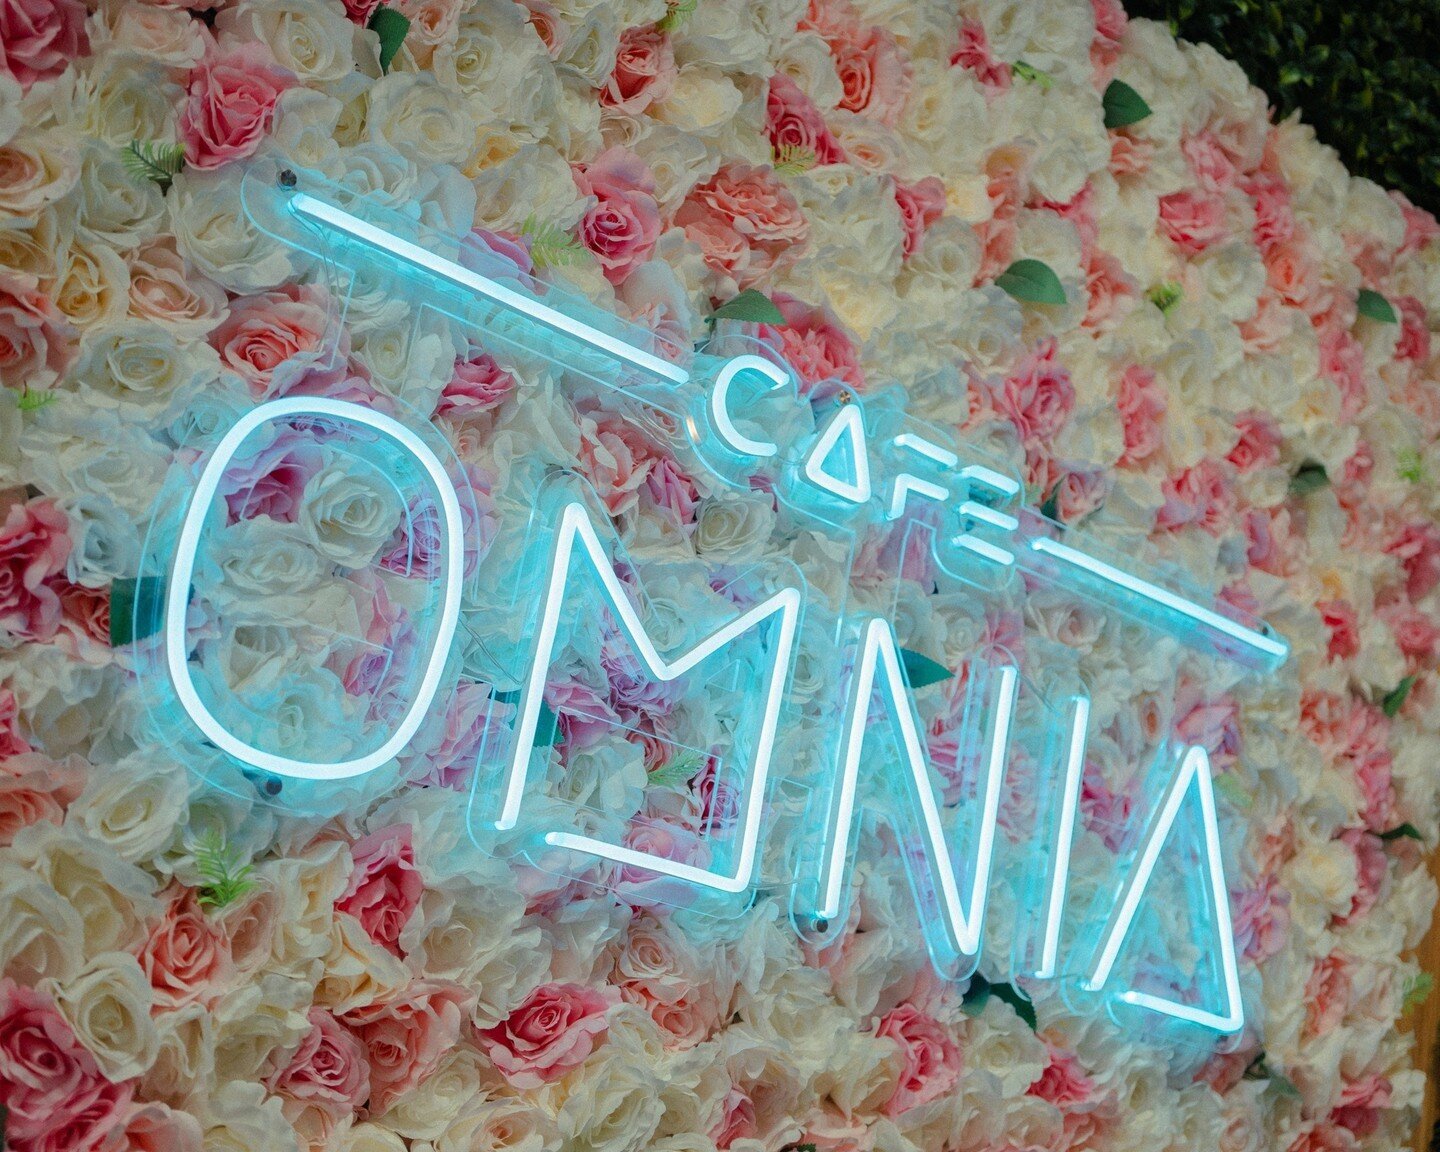 OMNIA is Latin and means &quot;everything&quot;⁠
This beautiful caf&eacute; we have created for you is a safe space where everything comes together: drinks, friends, food and fun in lovely Murrumbeena. See you at Omnia!⁠